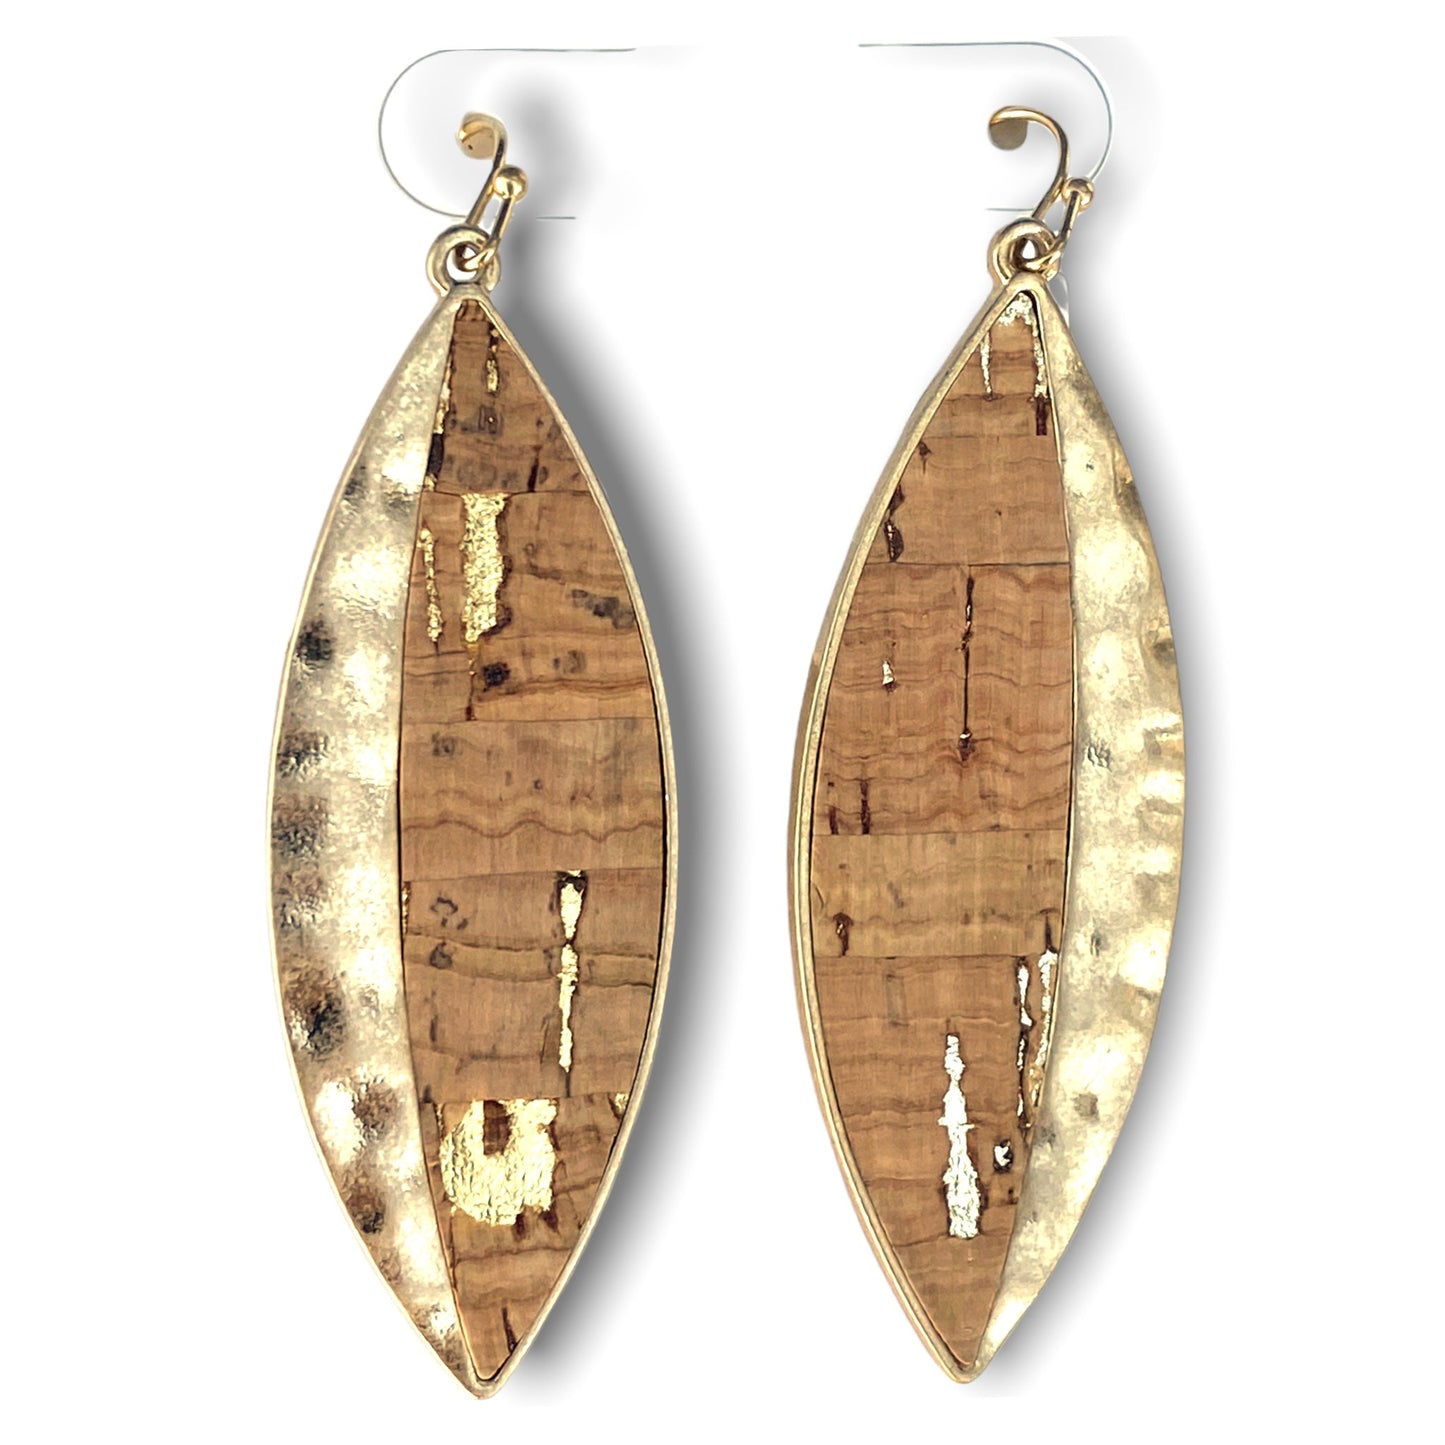 Leaf Shape Natural Cork Earrings with Gold Tone Trim - 3-in - Mellow Monkey